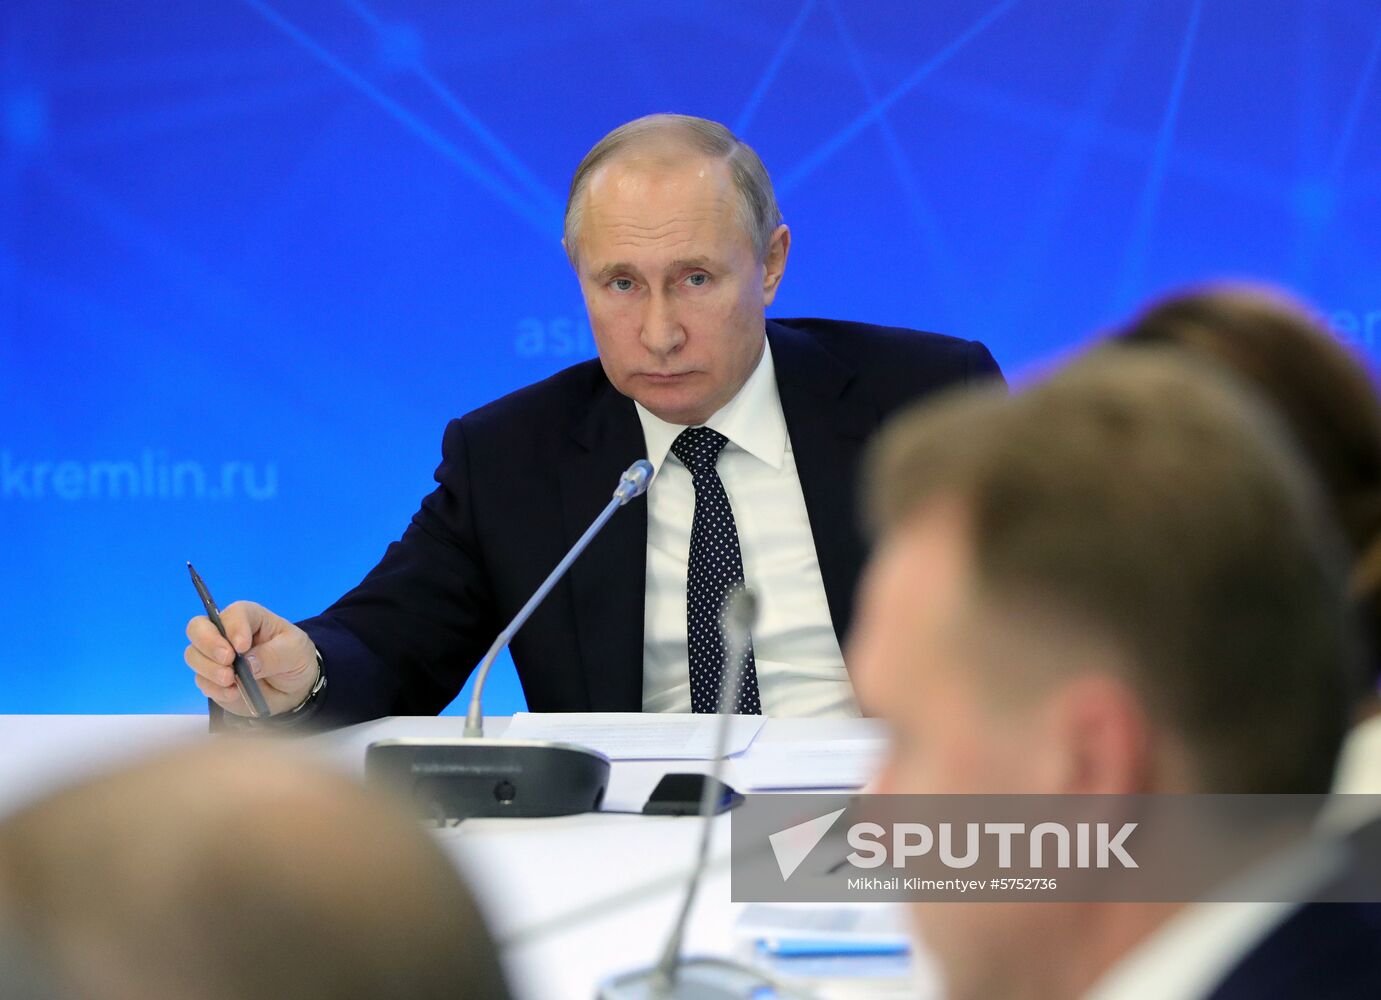 President Vladimir Putin chairs meeting of Agency for Strategic Initiatives Supervisory Board